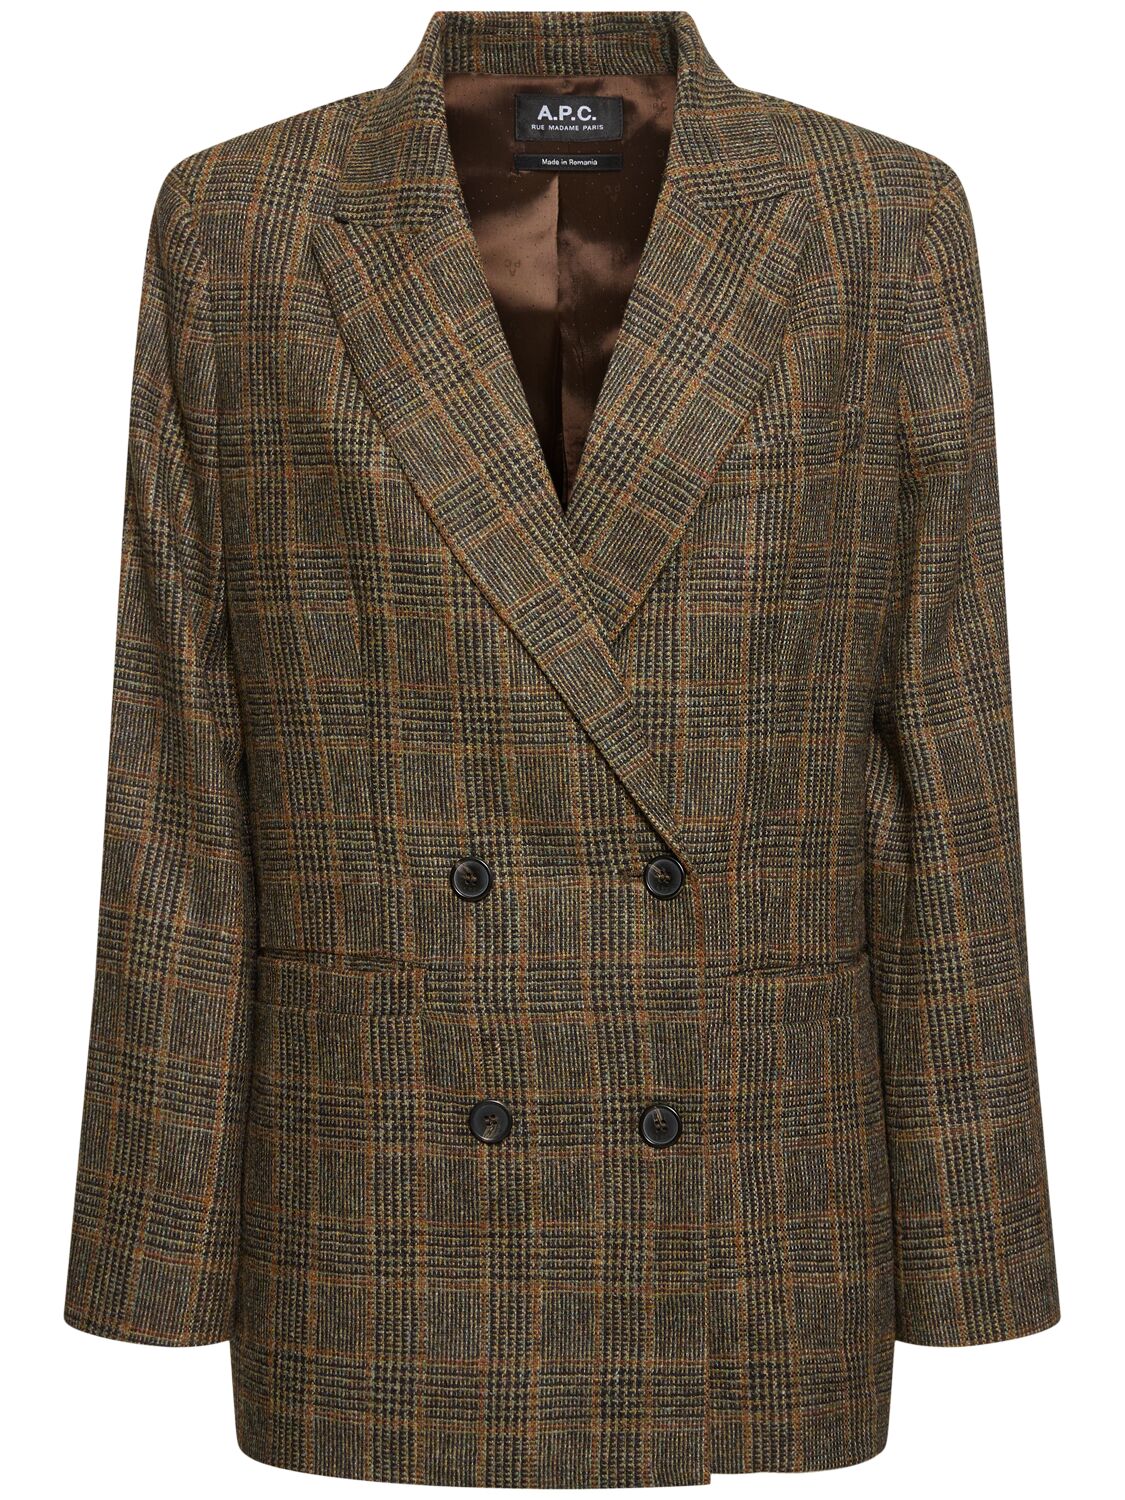 Lucy Wool Jacket